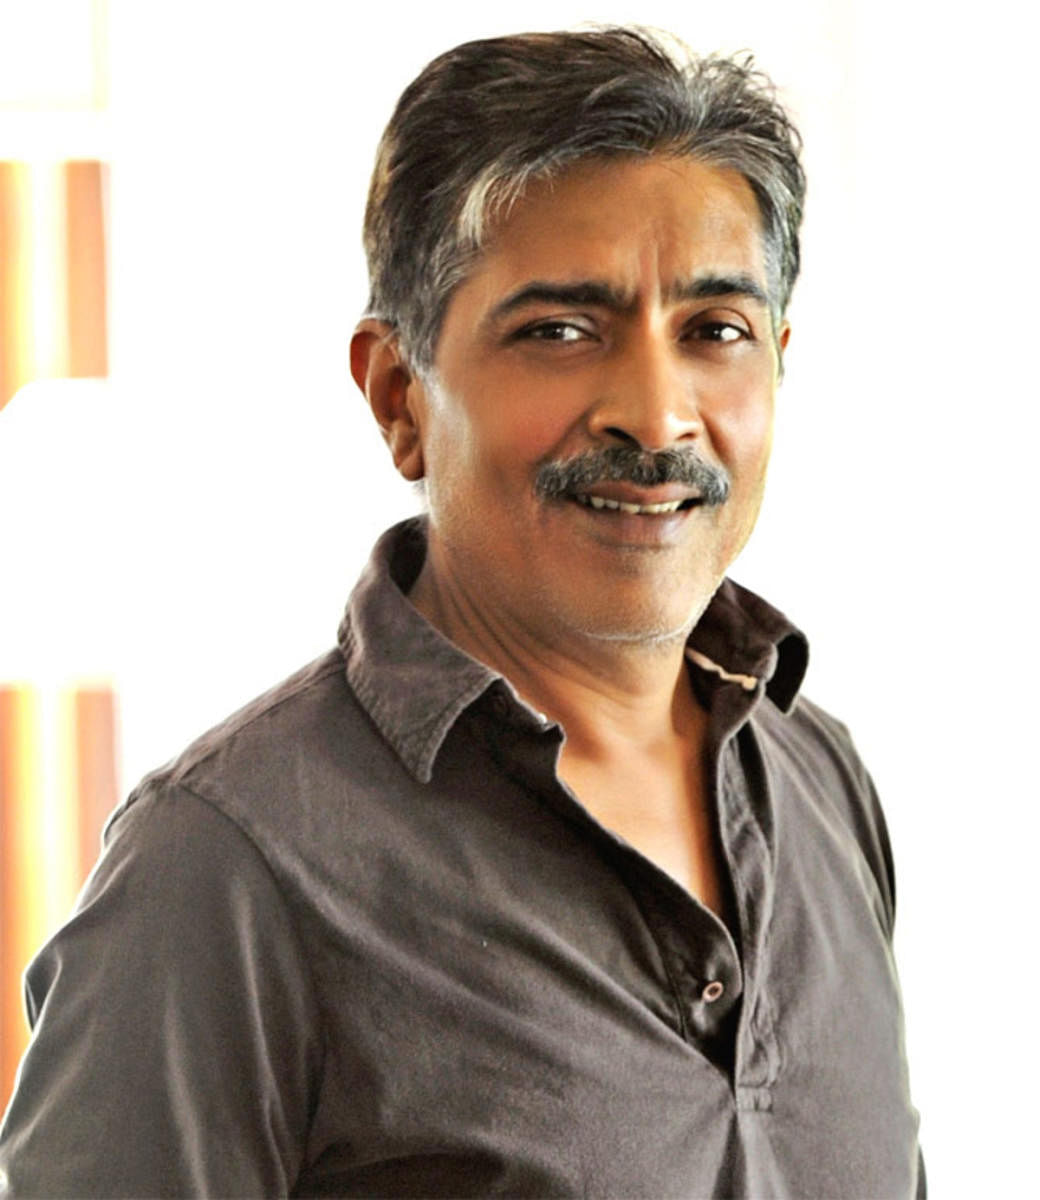 Jha, whose filmography stands on a string of sociopolitical features such as "Mrityudand", "Gangaajal" films and "Apaharan", said the entire scenario shifts when there are elections.